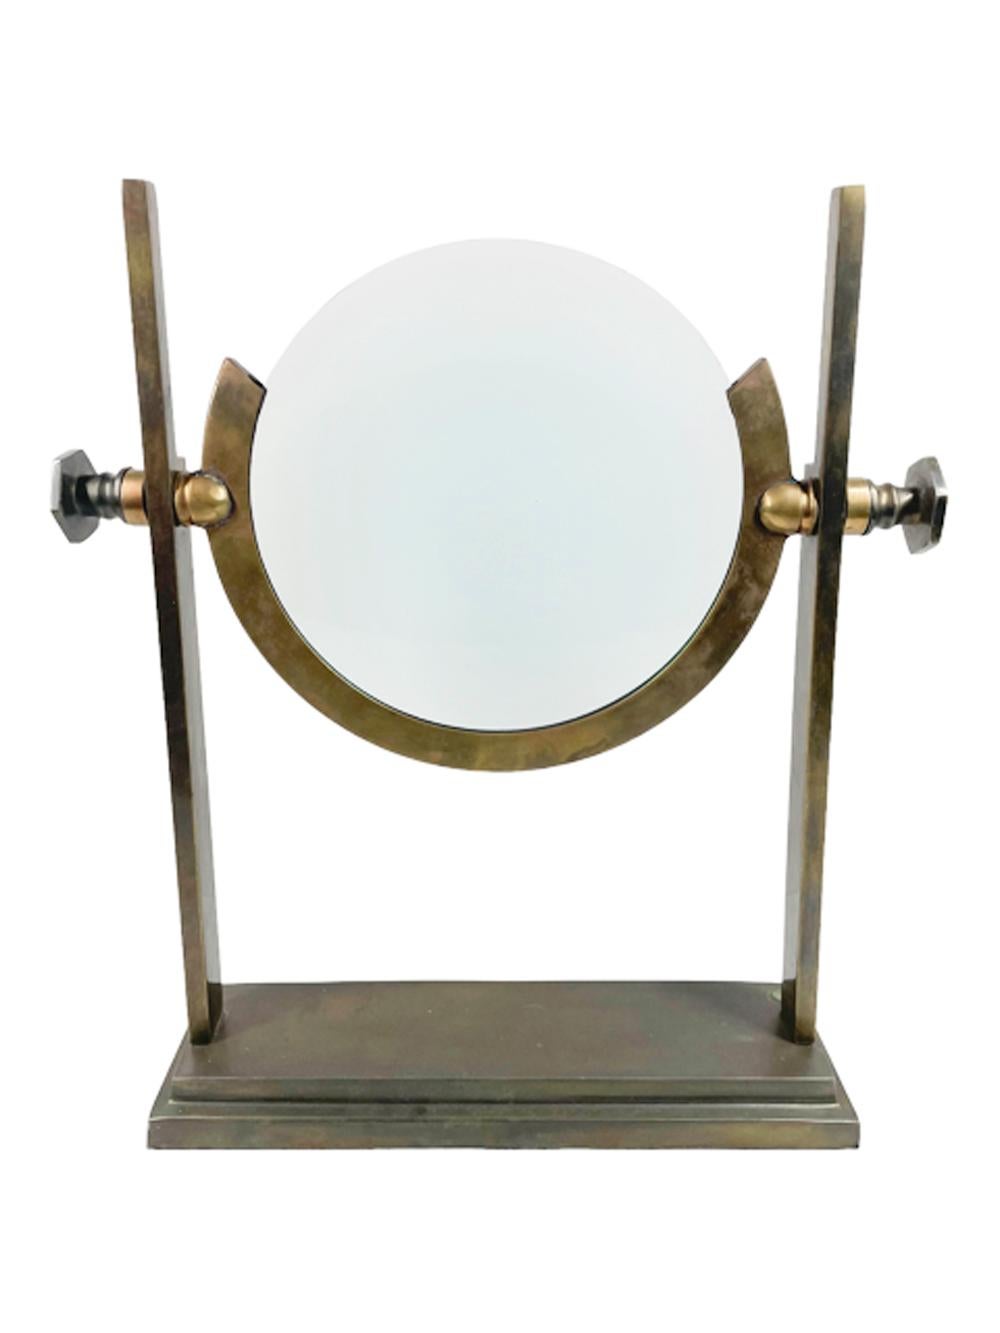 Art Deco desk/table top adjustable magnifying glass. A 7